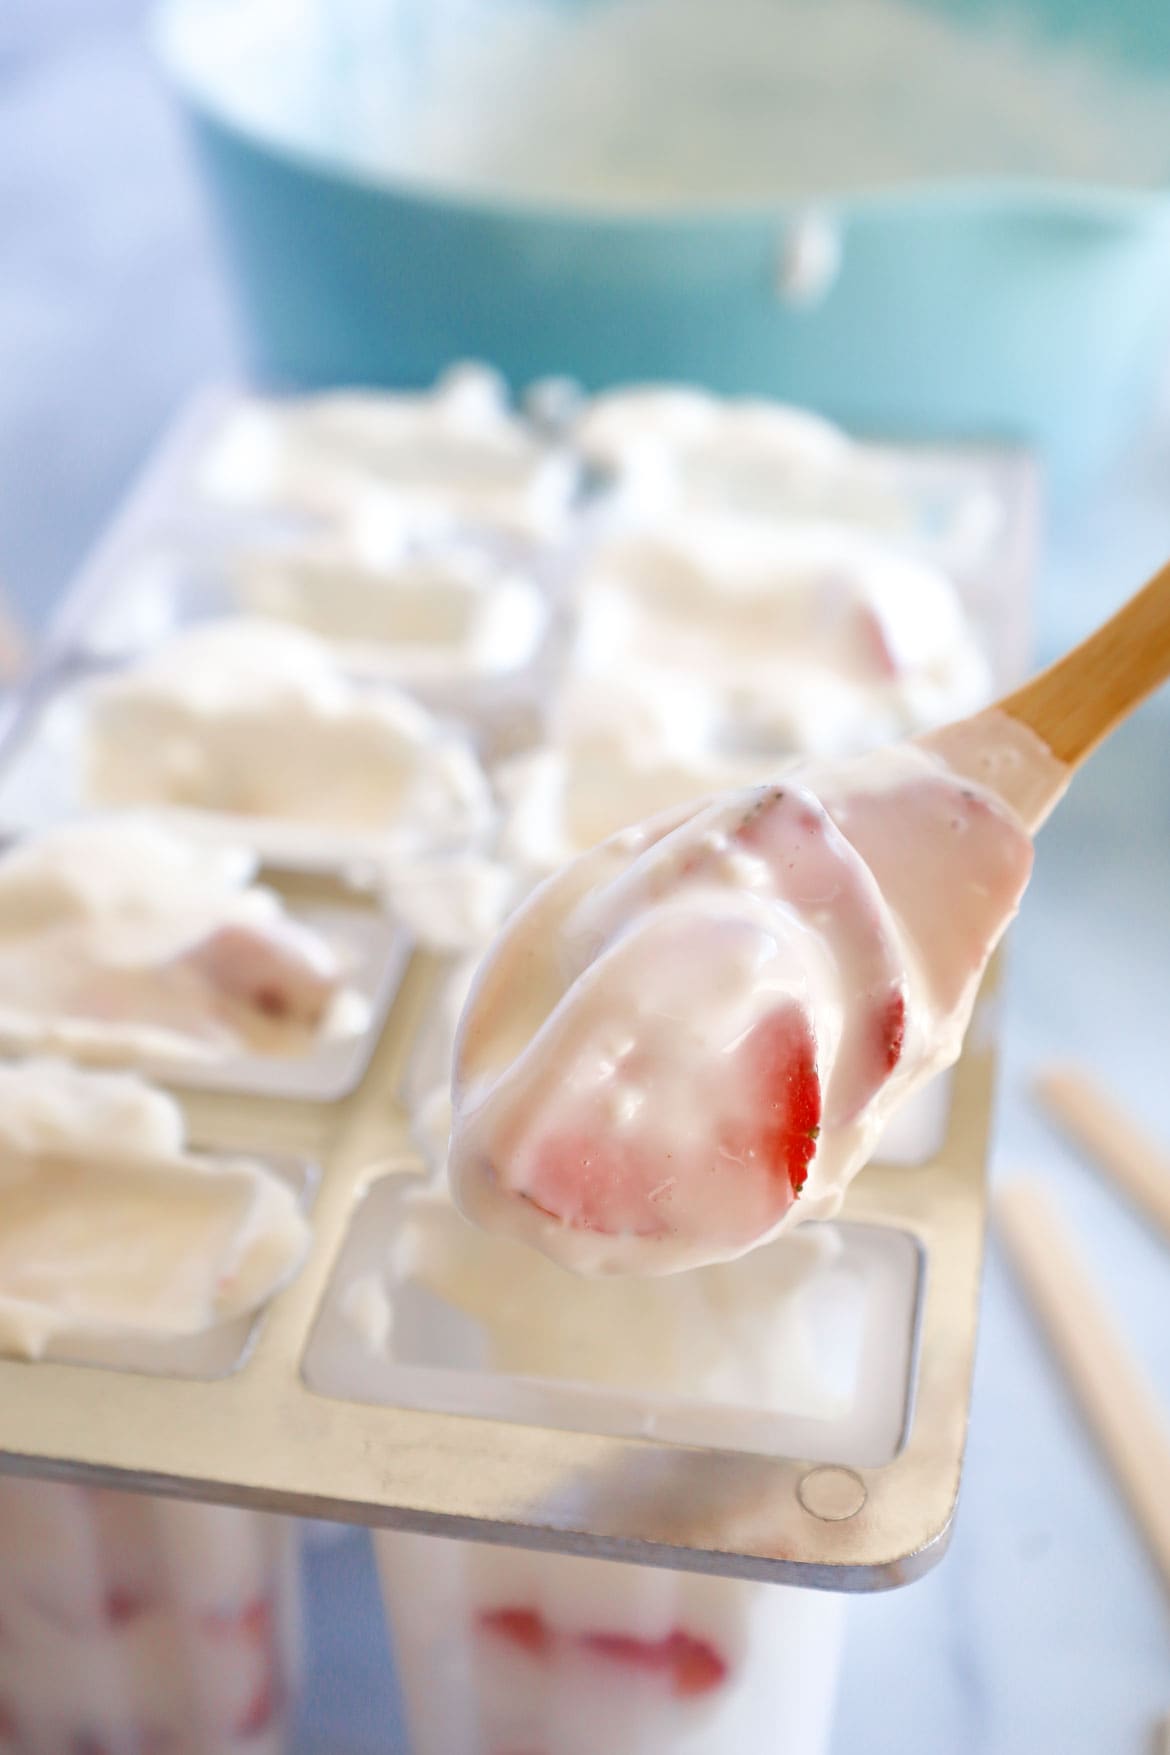 Spooning strawberry cheesecake mixture into popsicle molds